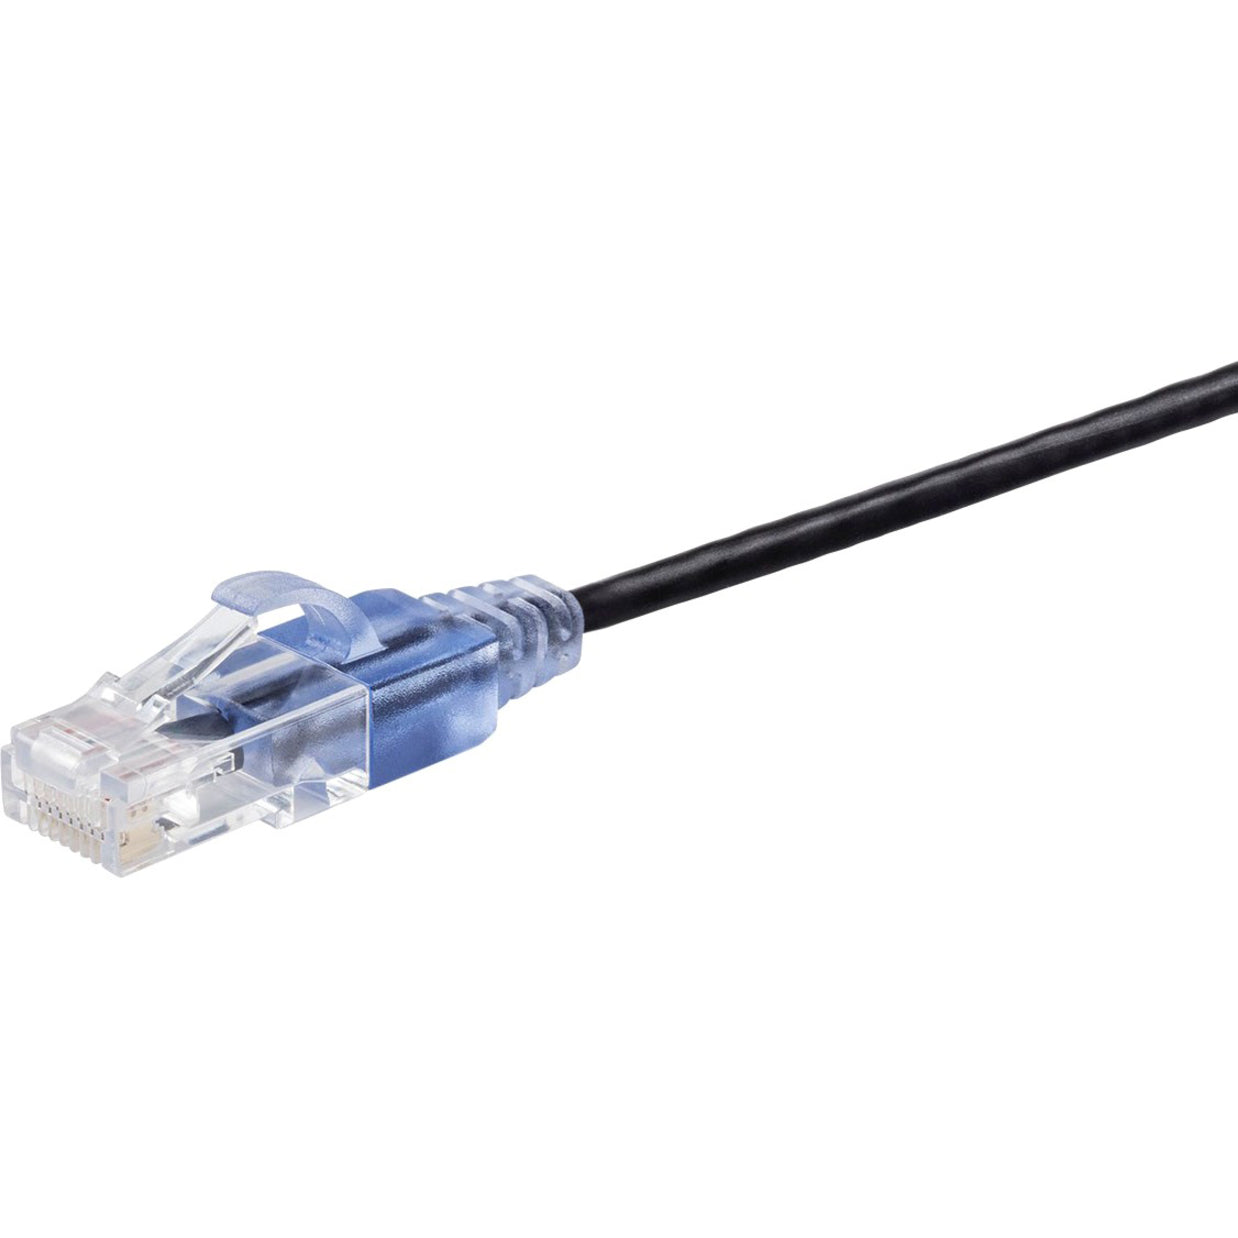 Monoprice 15161 SlimRun Cat6A Ethernet Network Patch Cable 7ft Black, 10-Pack